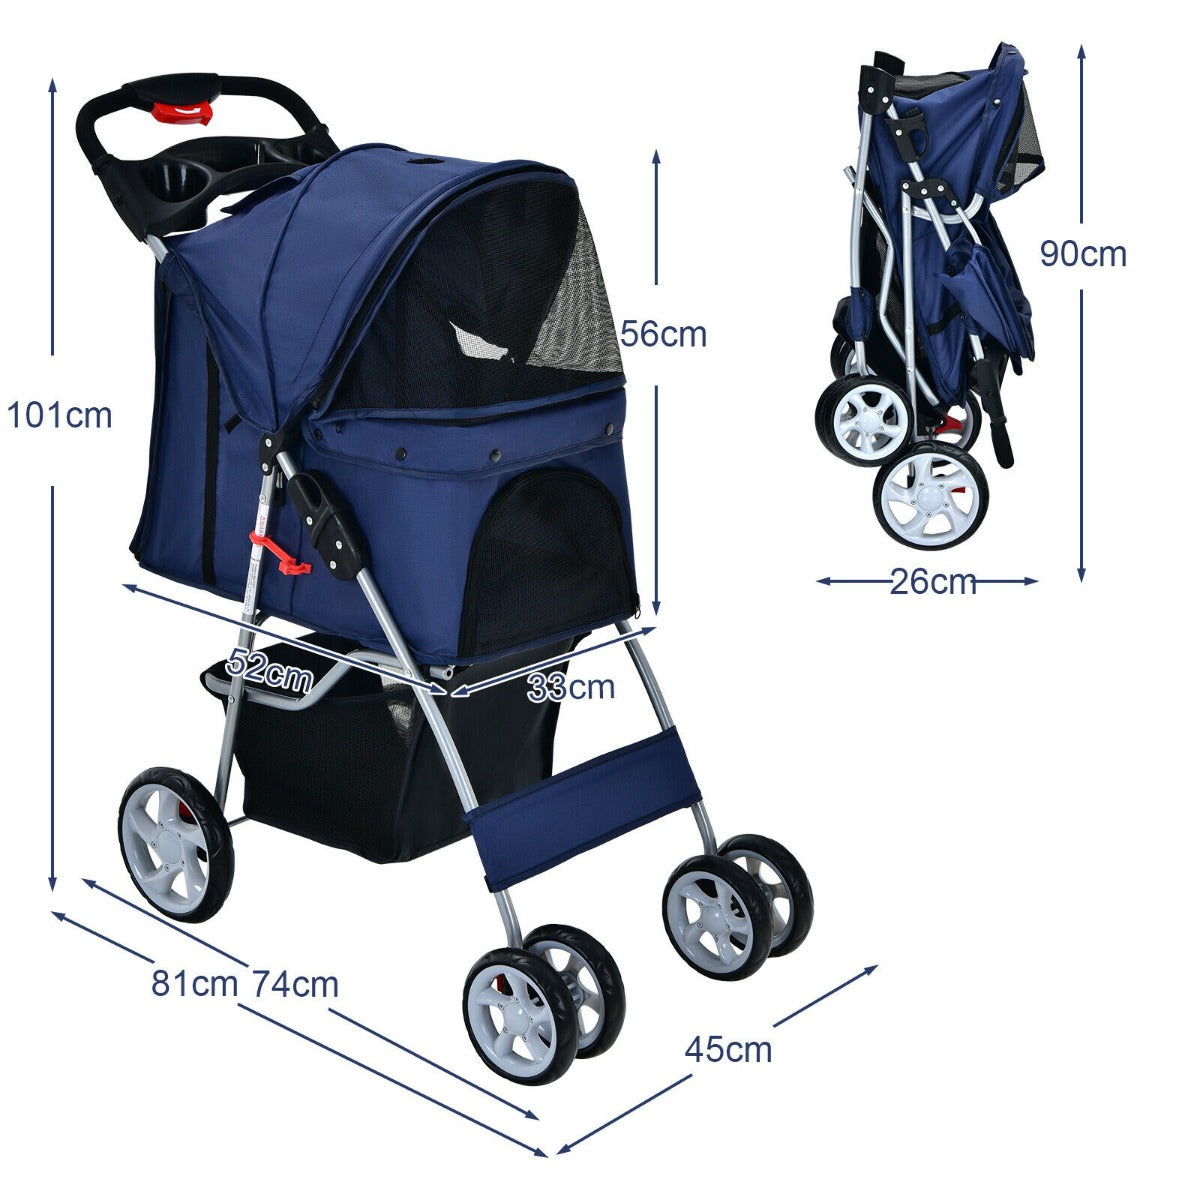 4-Wheel Folding Pet Stroller with Storage Basket and Adjustable Canopy-Navy